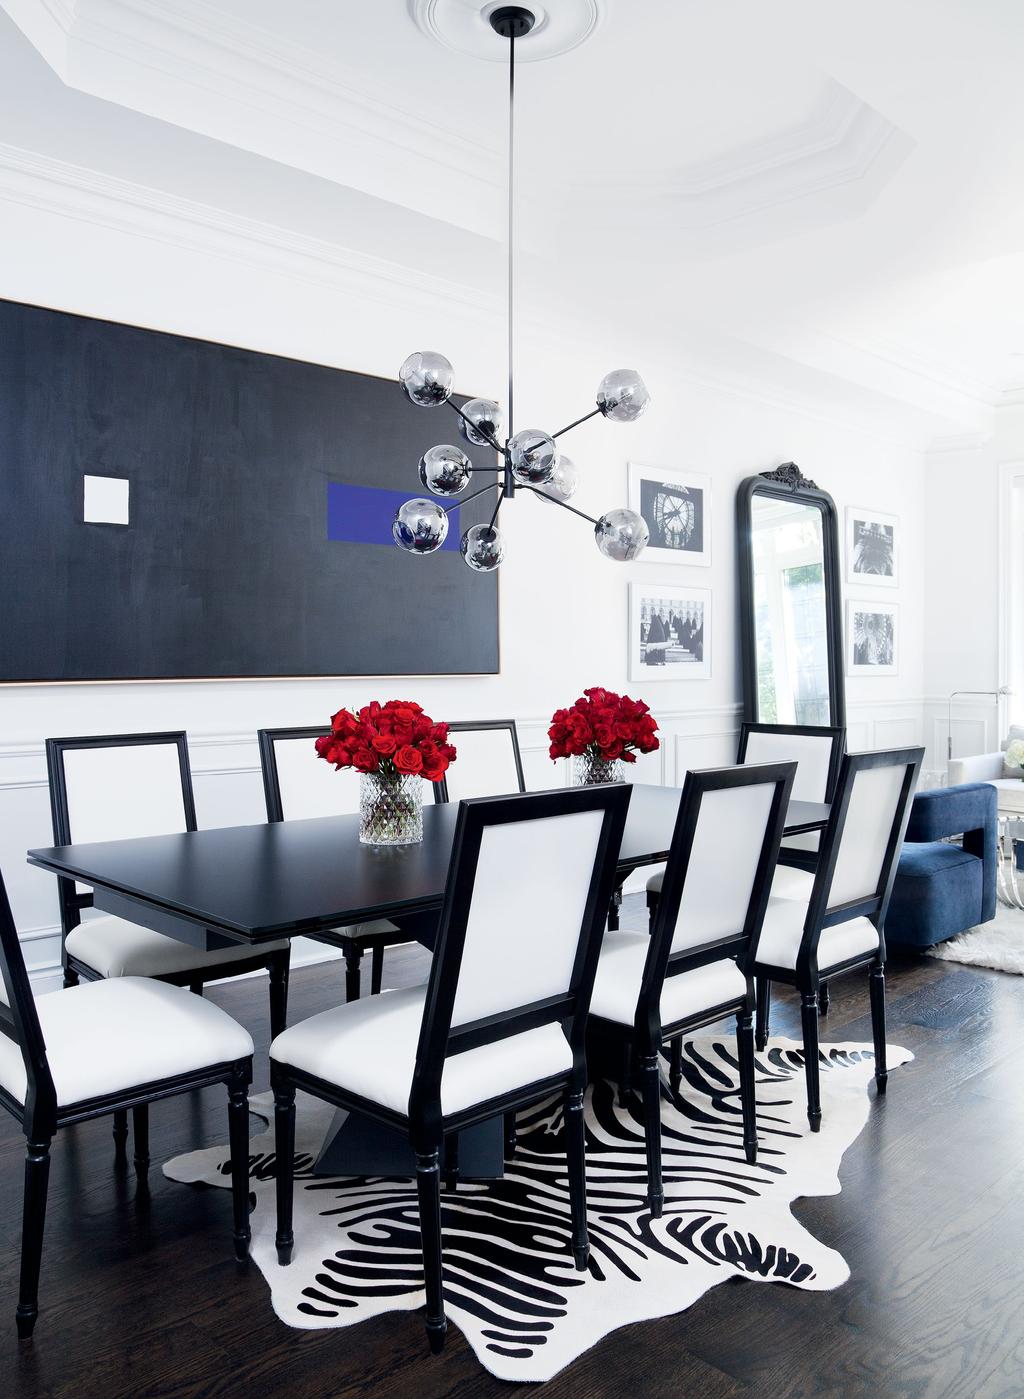 orking with these super-stylish homeowners was a dream project for designers Ashley Tracey and Laura McLellan, one that allowed them to channel their love of art and fashion and incorporate their